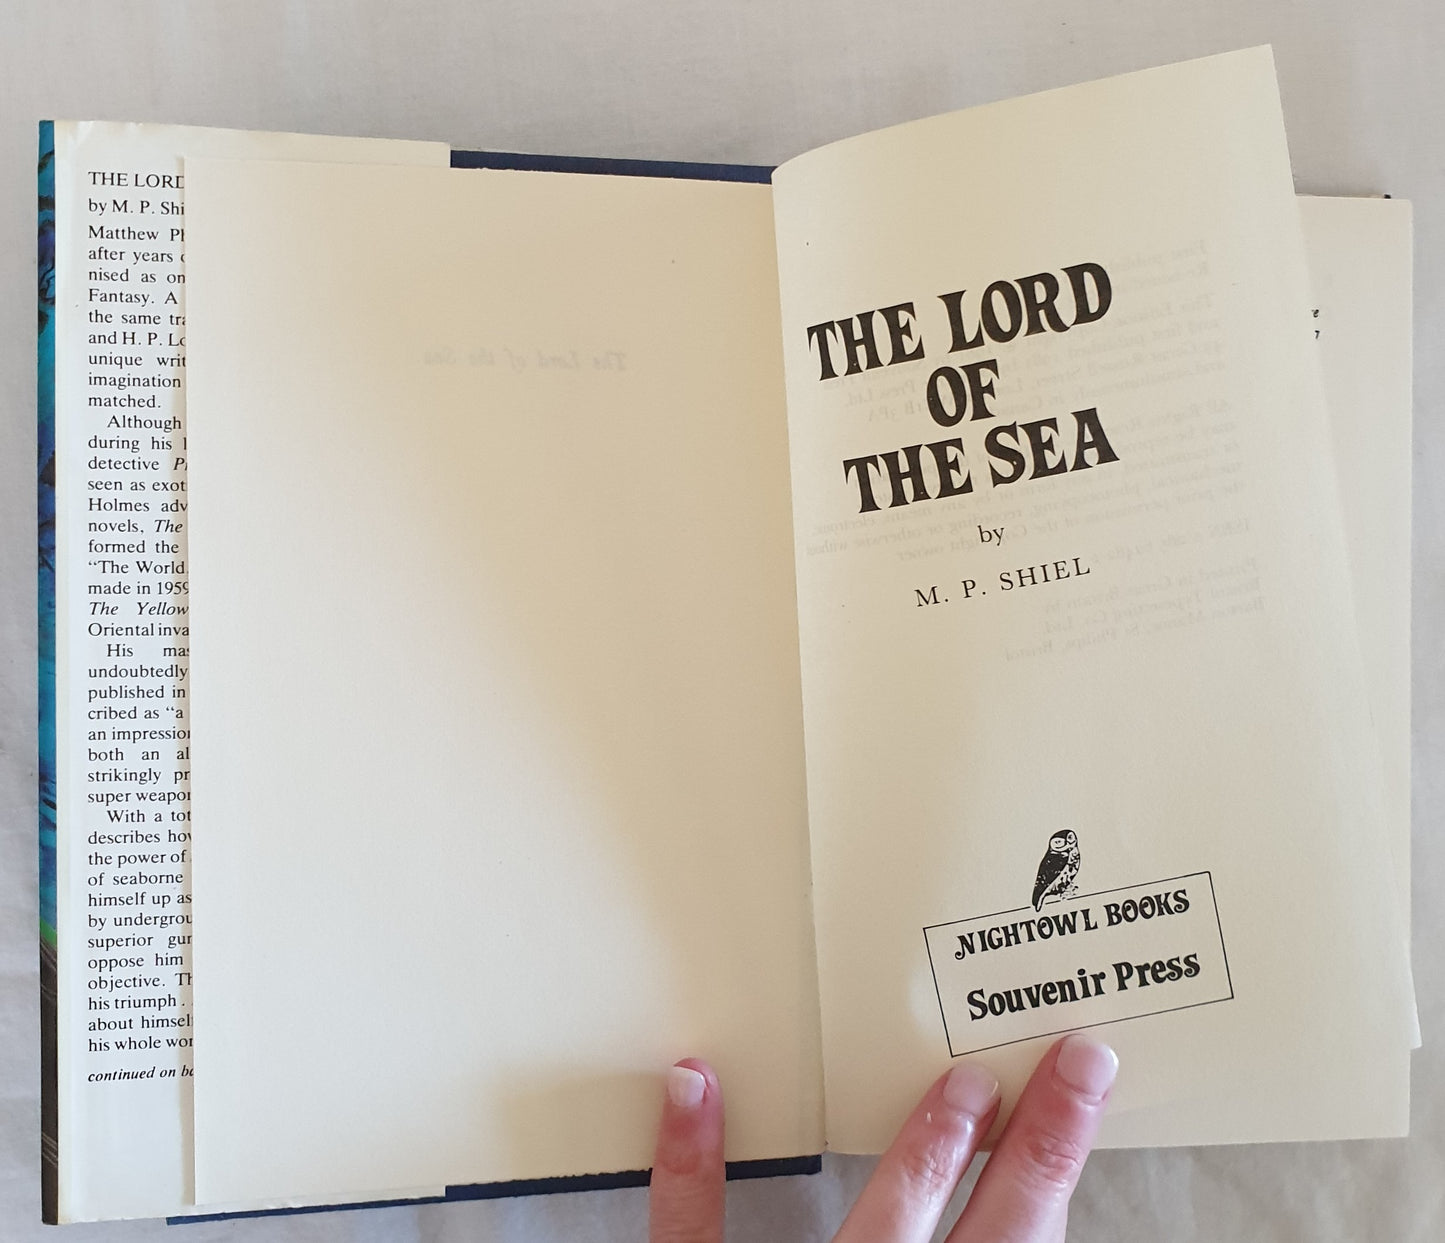 The Lord of the Sea by M. P. Shiel